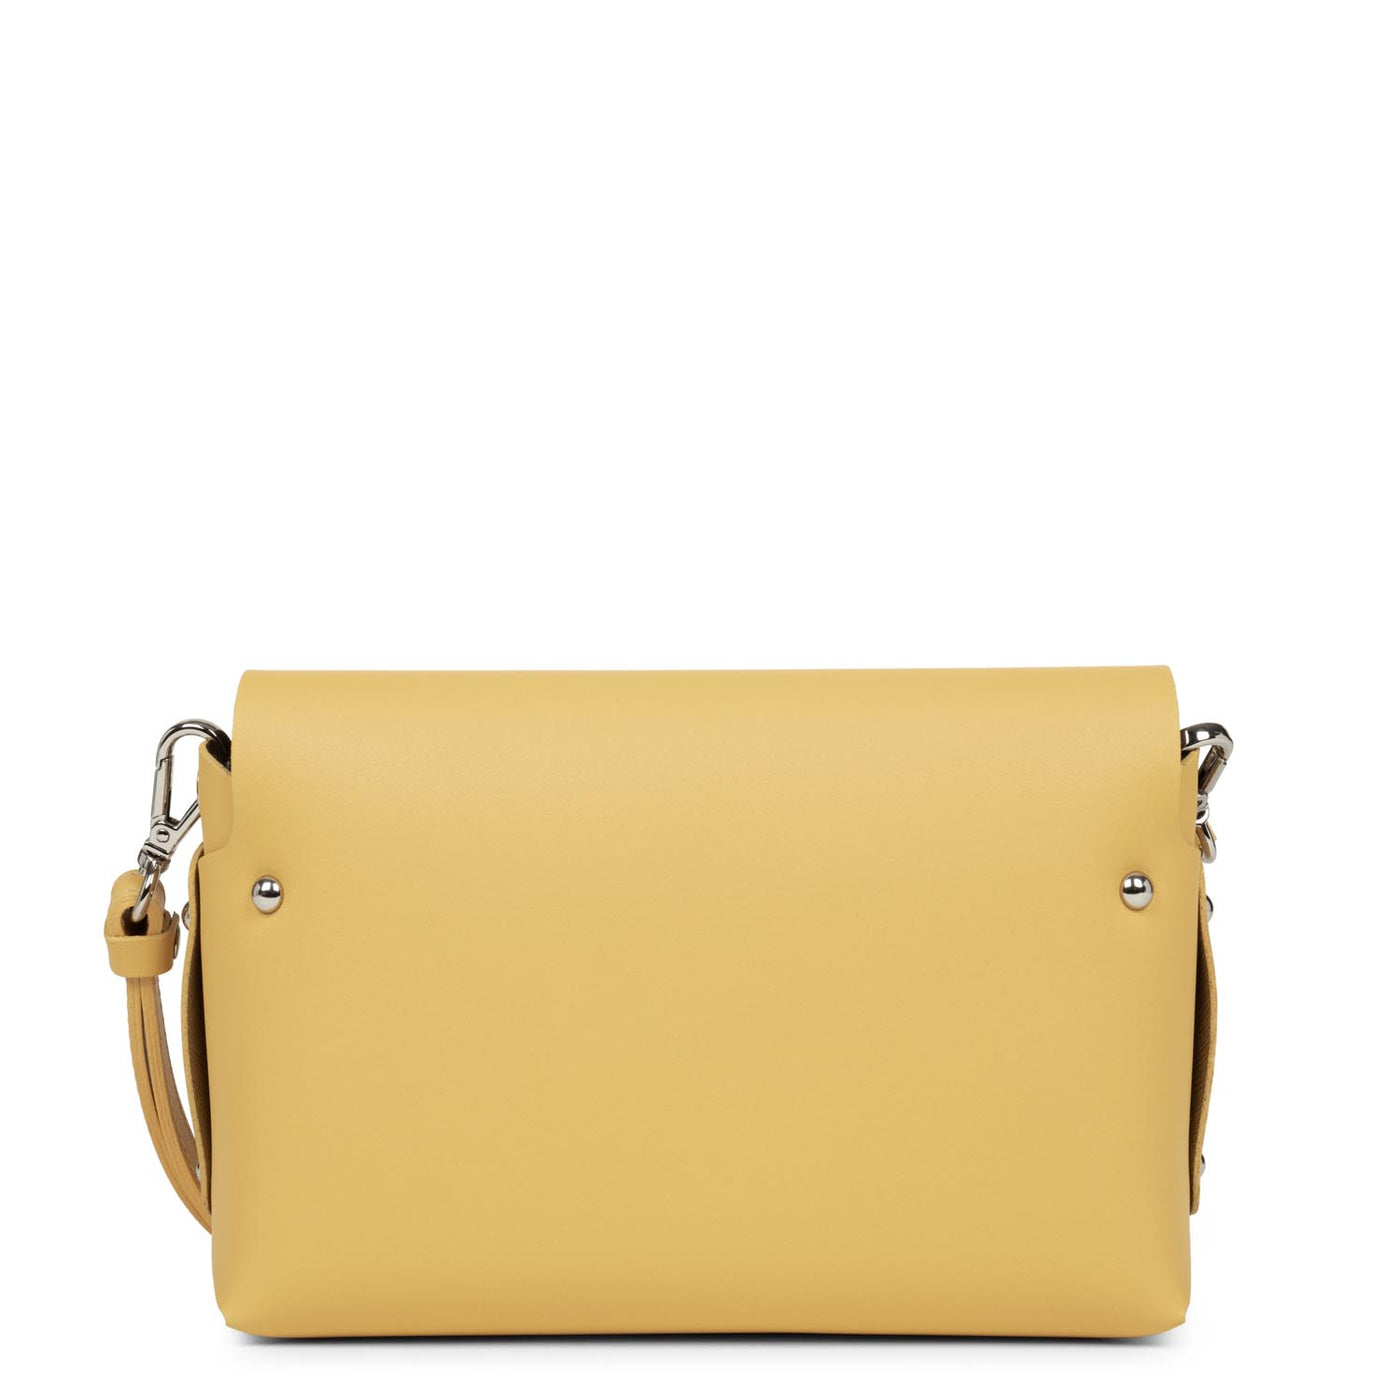 crossbody bag - city flore #couleur_ocre-in-champagne